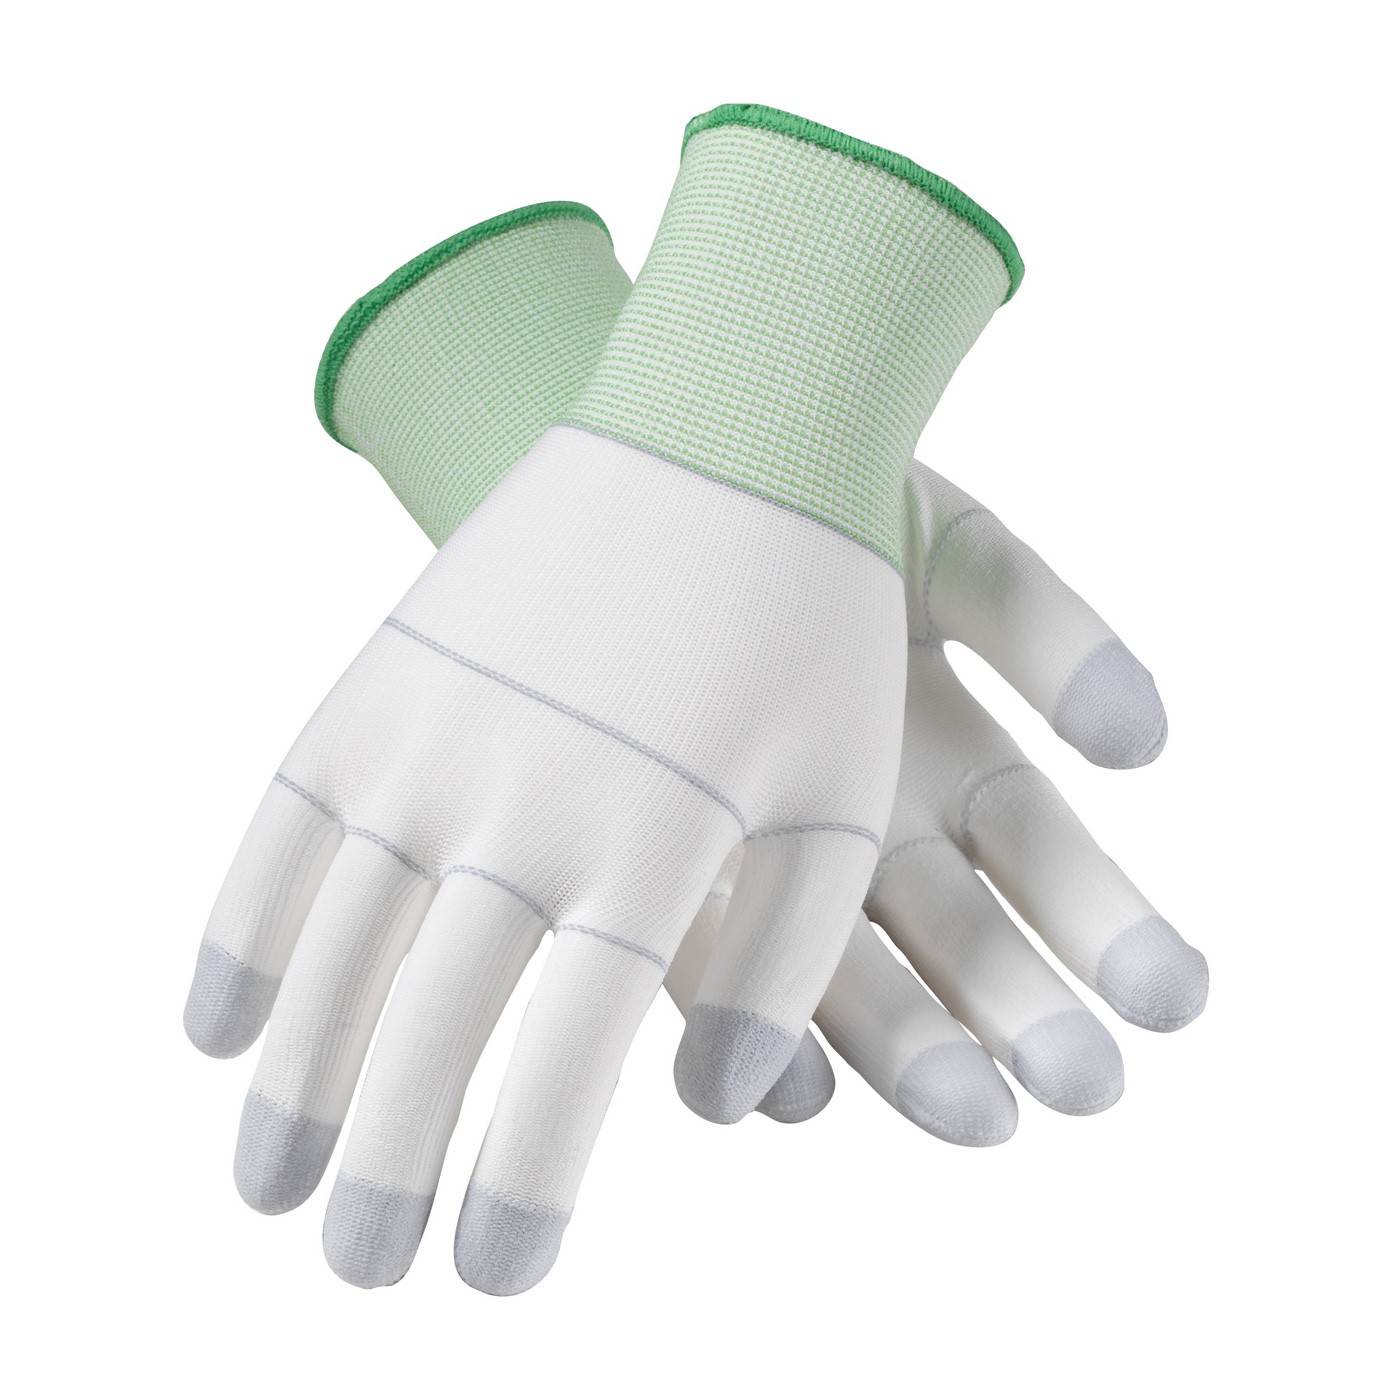 CleanTeam Nylon w/PU Coating on Palm and Finger Tips Size Medium